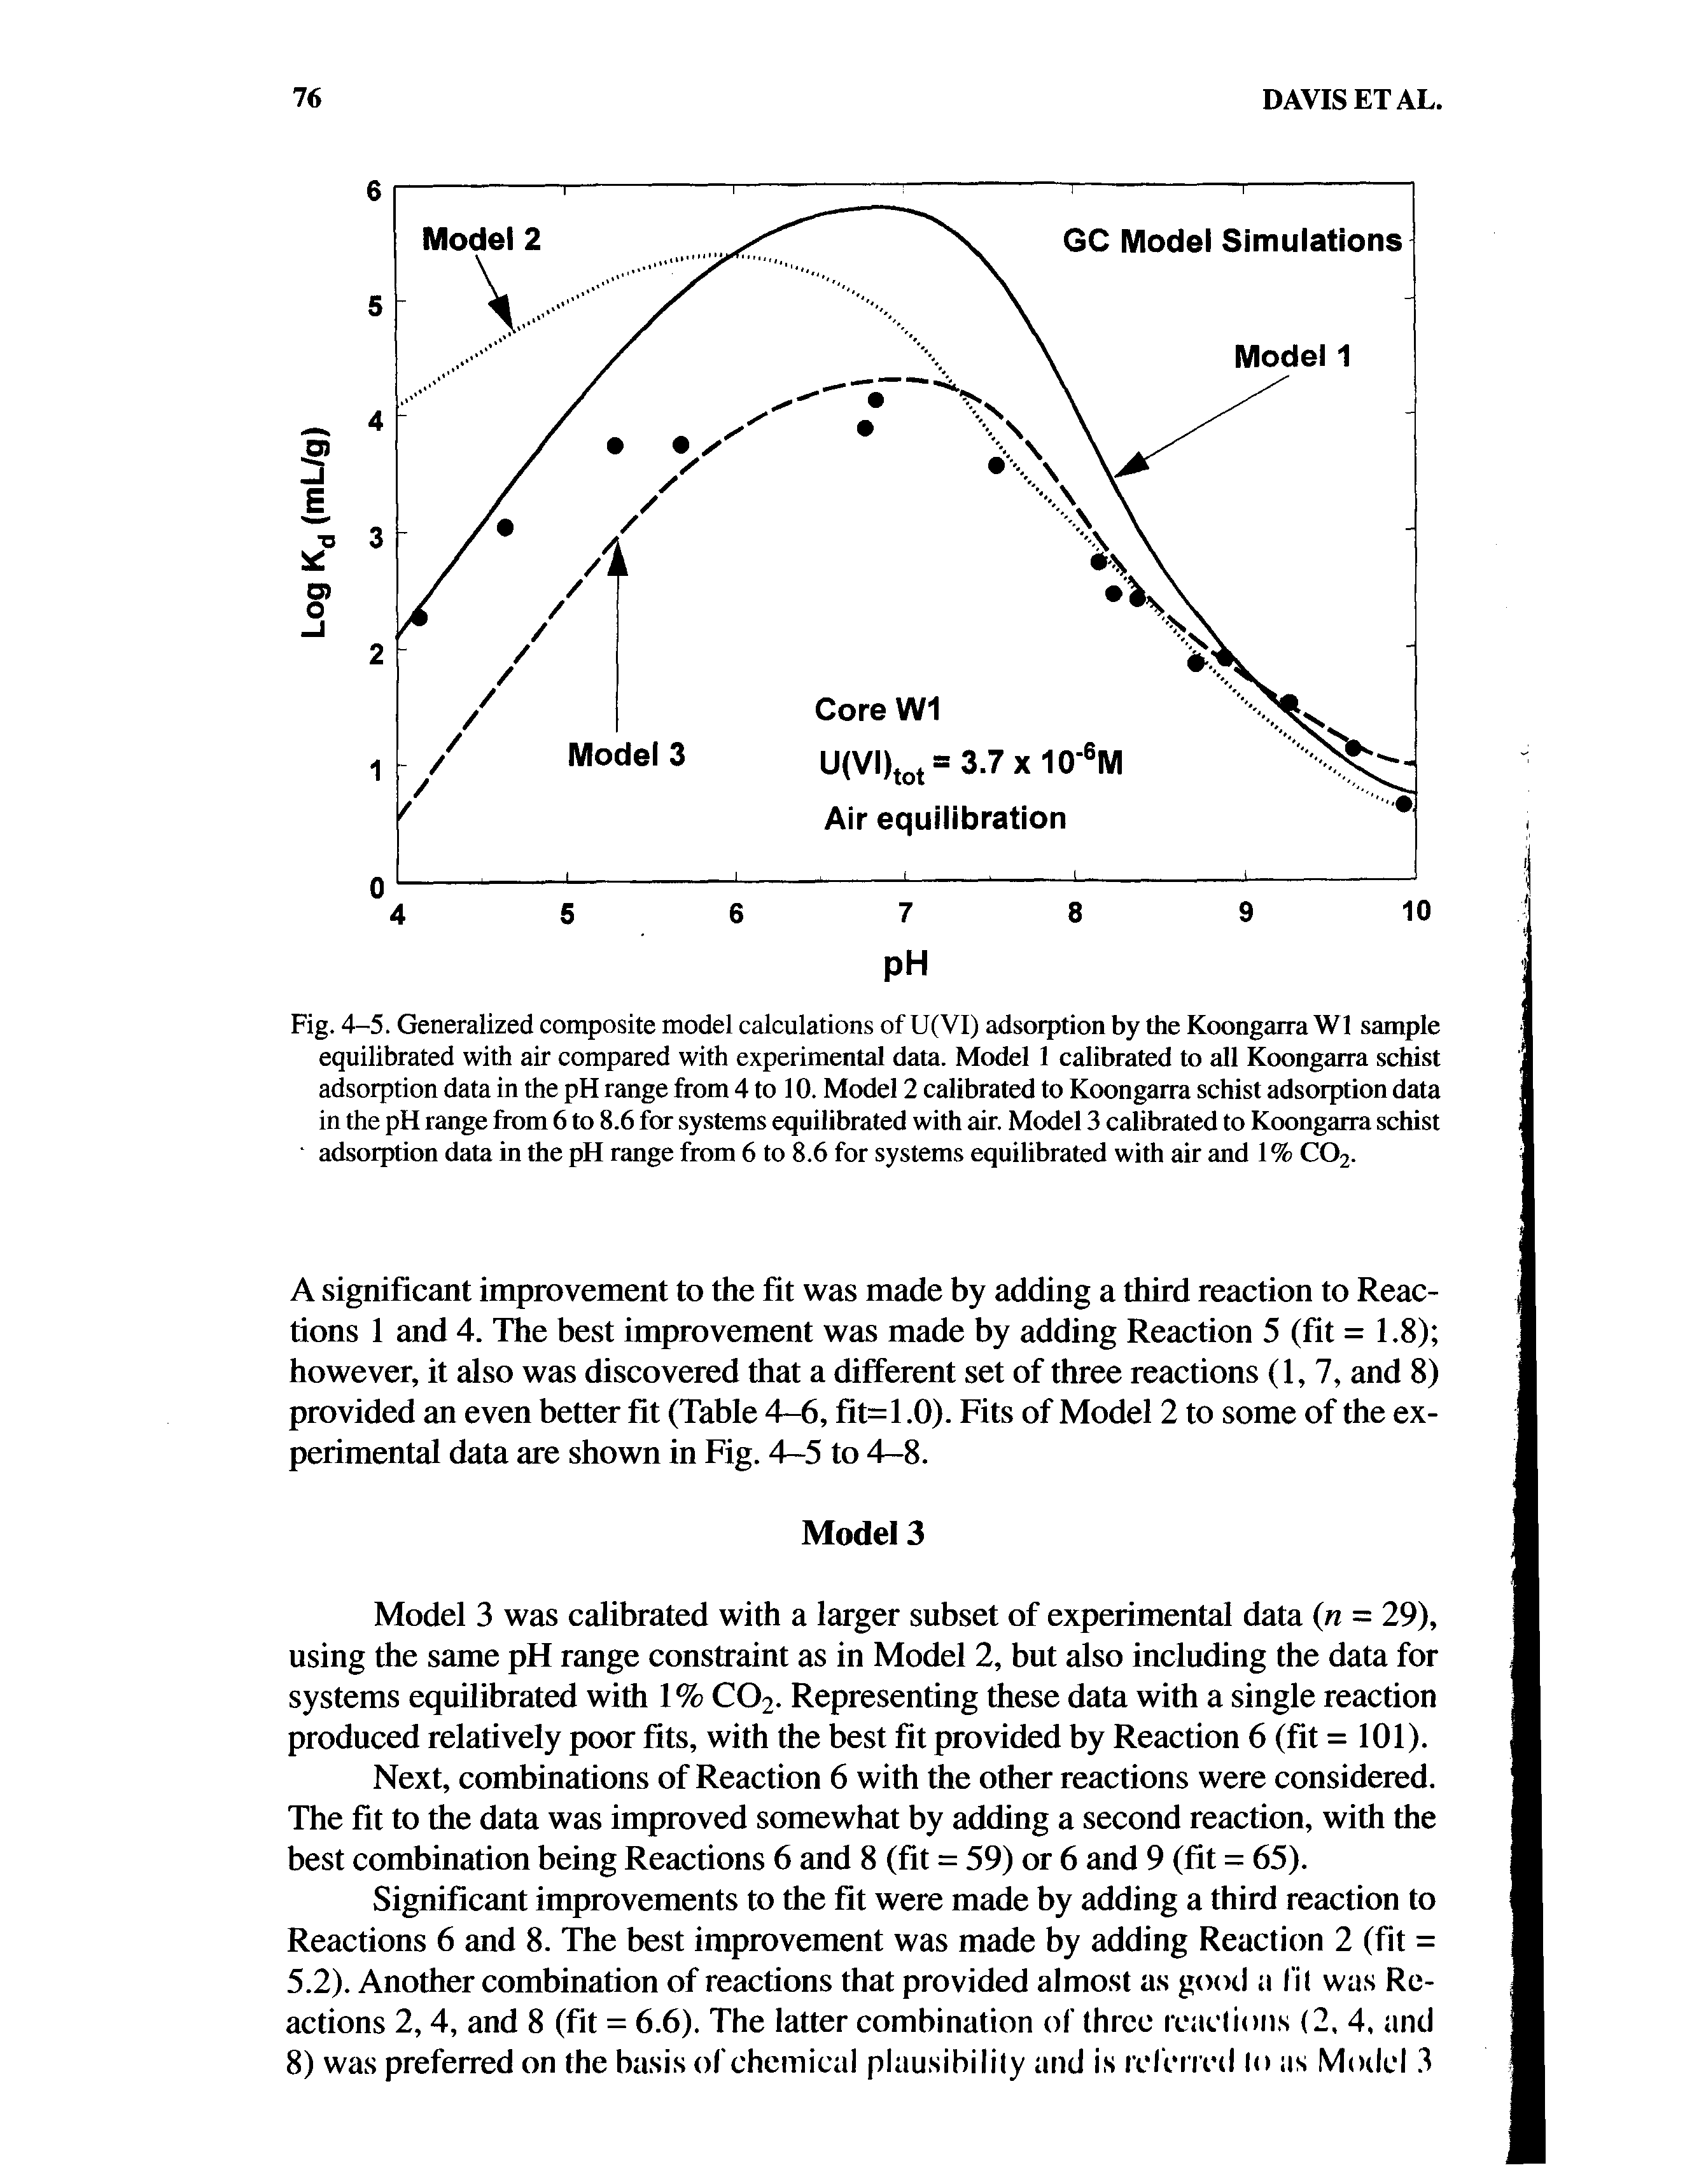 Fig. 4-5. Generalized composite model calculations of U(VI) adsorption by the Koongarra W1 sample equilibrated with air compared with experimental data. Model 1 calibrated to all Koongarra schist adsorption data in the pH range from 4 to 10. Model 2 calibrated to Koongarra schist adsorption data in the pH range from 6 to 8.6 for systems equilibrated with air. Model 3 calibrated to Koongarra schist adsorption data in the pH range from 6 to 8.6 for systems equilibrated with air and 1 % CO2.